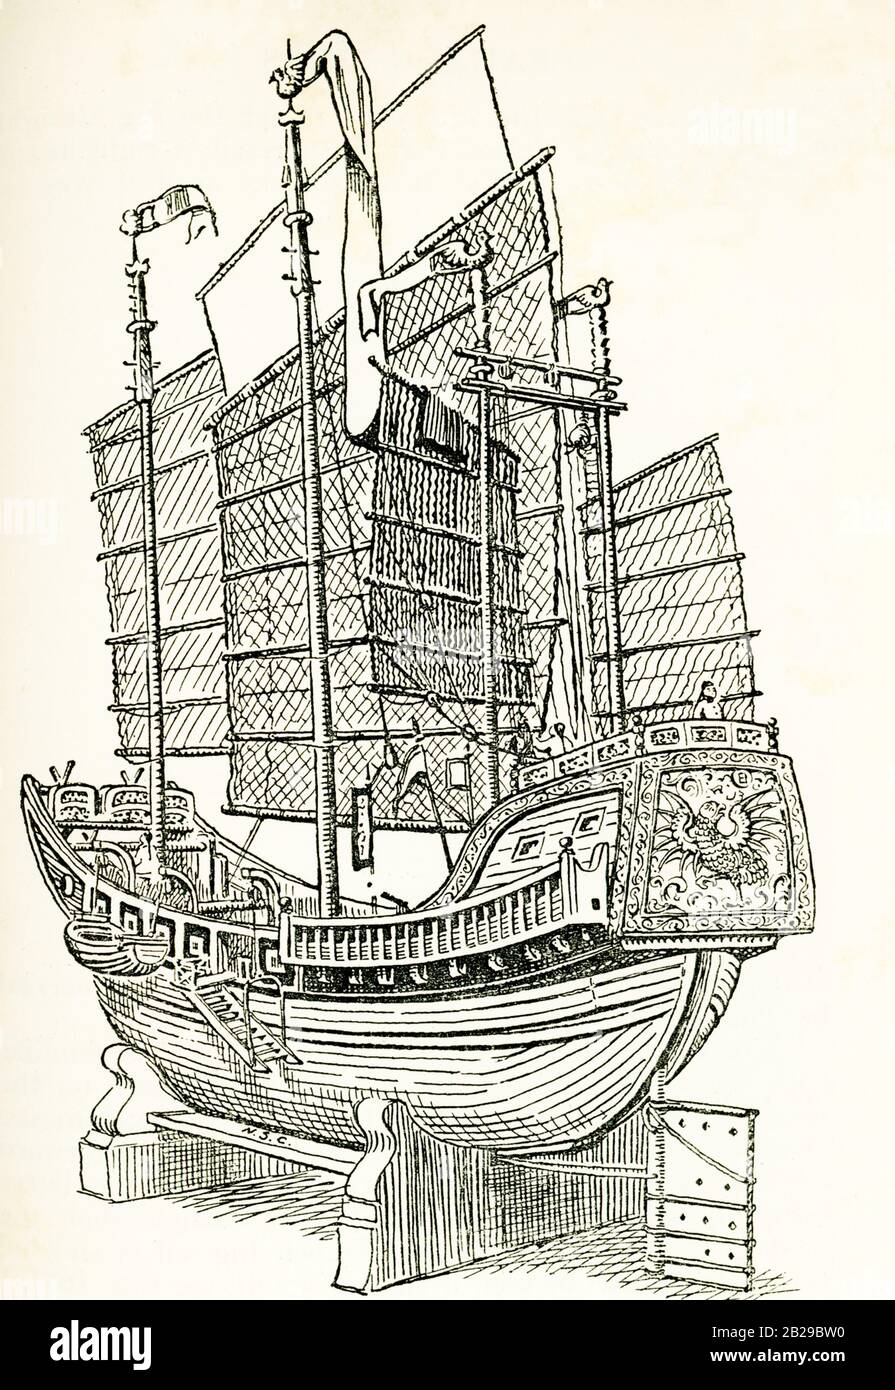 This illustration of a Chinese junk dates to the early 1900s and is based on a model in the south Kensington Museum in England. The junk is a type of Chinese sailing boat.They were developed during the Song dynasty (960–1279) based on maritime Southeast Asian ship designs that have been trading with the Eastern Han dynasty since the 2nd century AD. Stock Photo